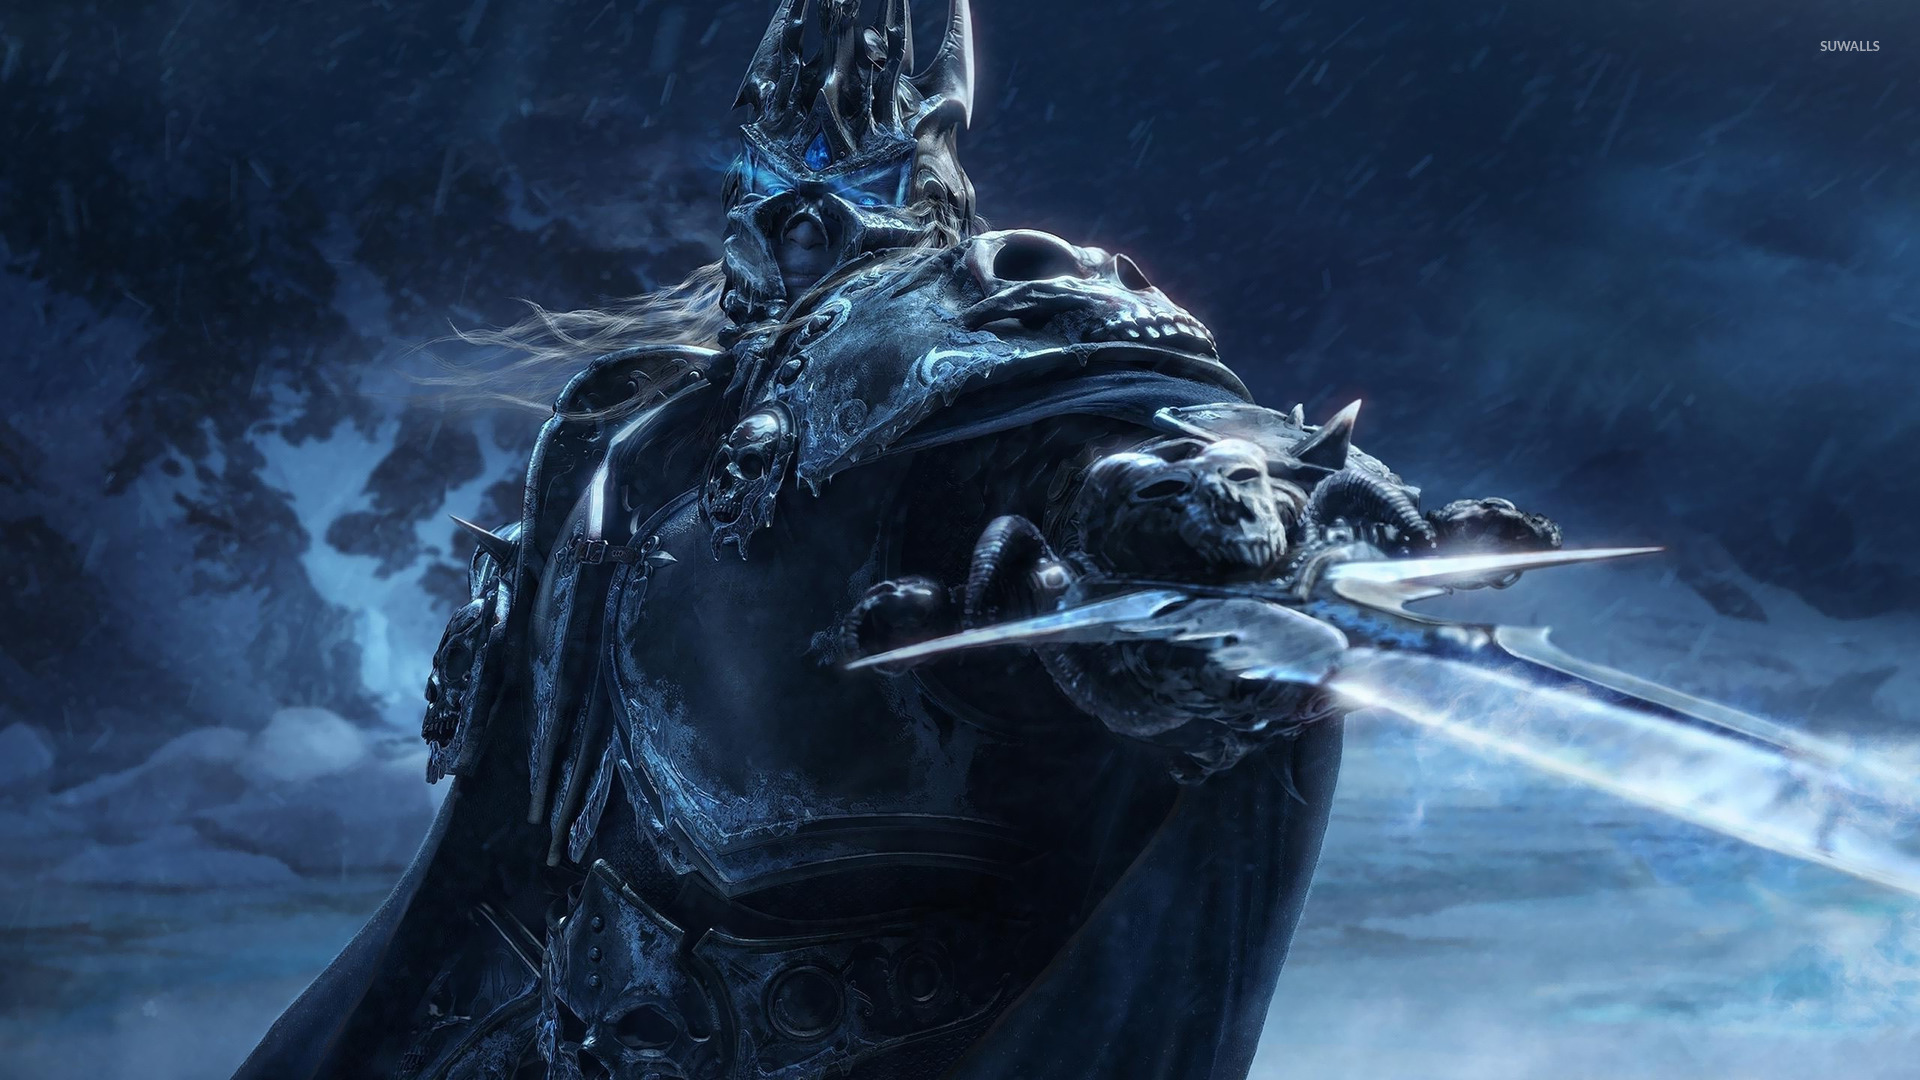 World of Warcraft Wrath of the Lich King wallpaper   Game wallpapers 1920x1080